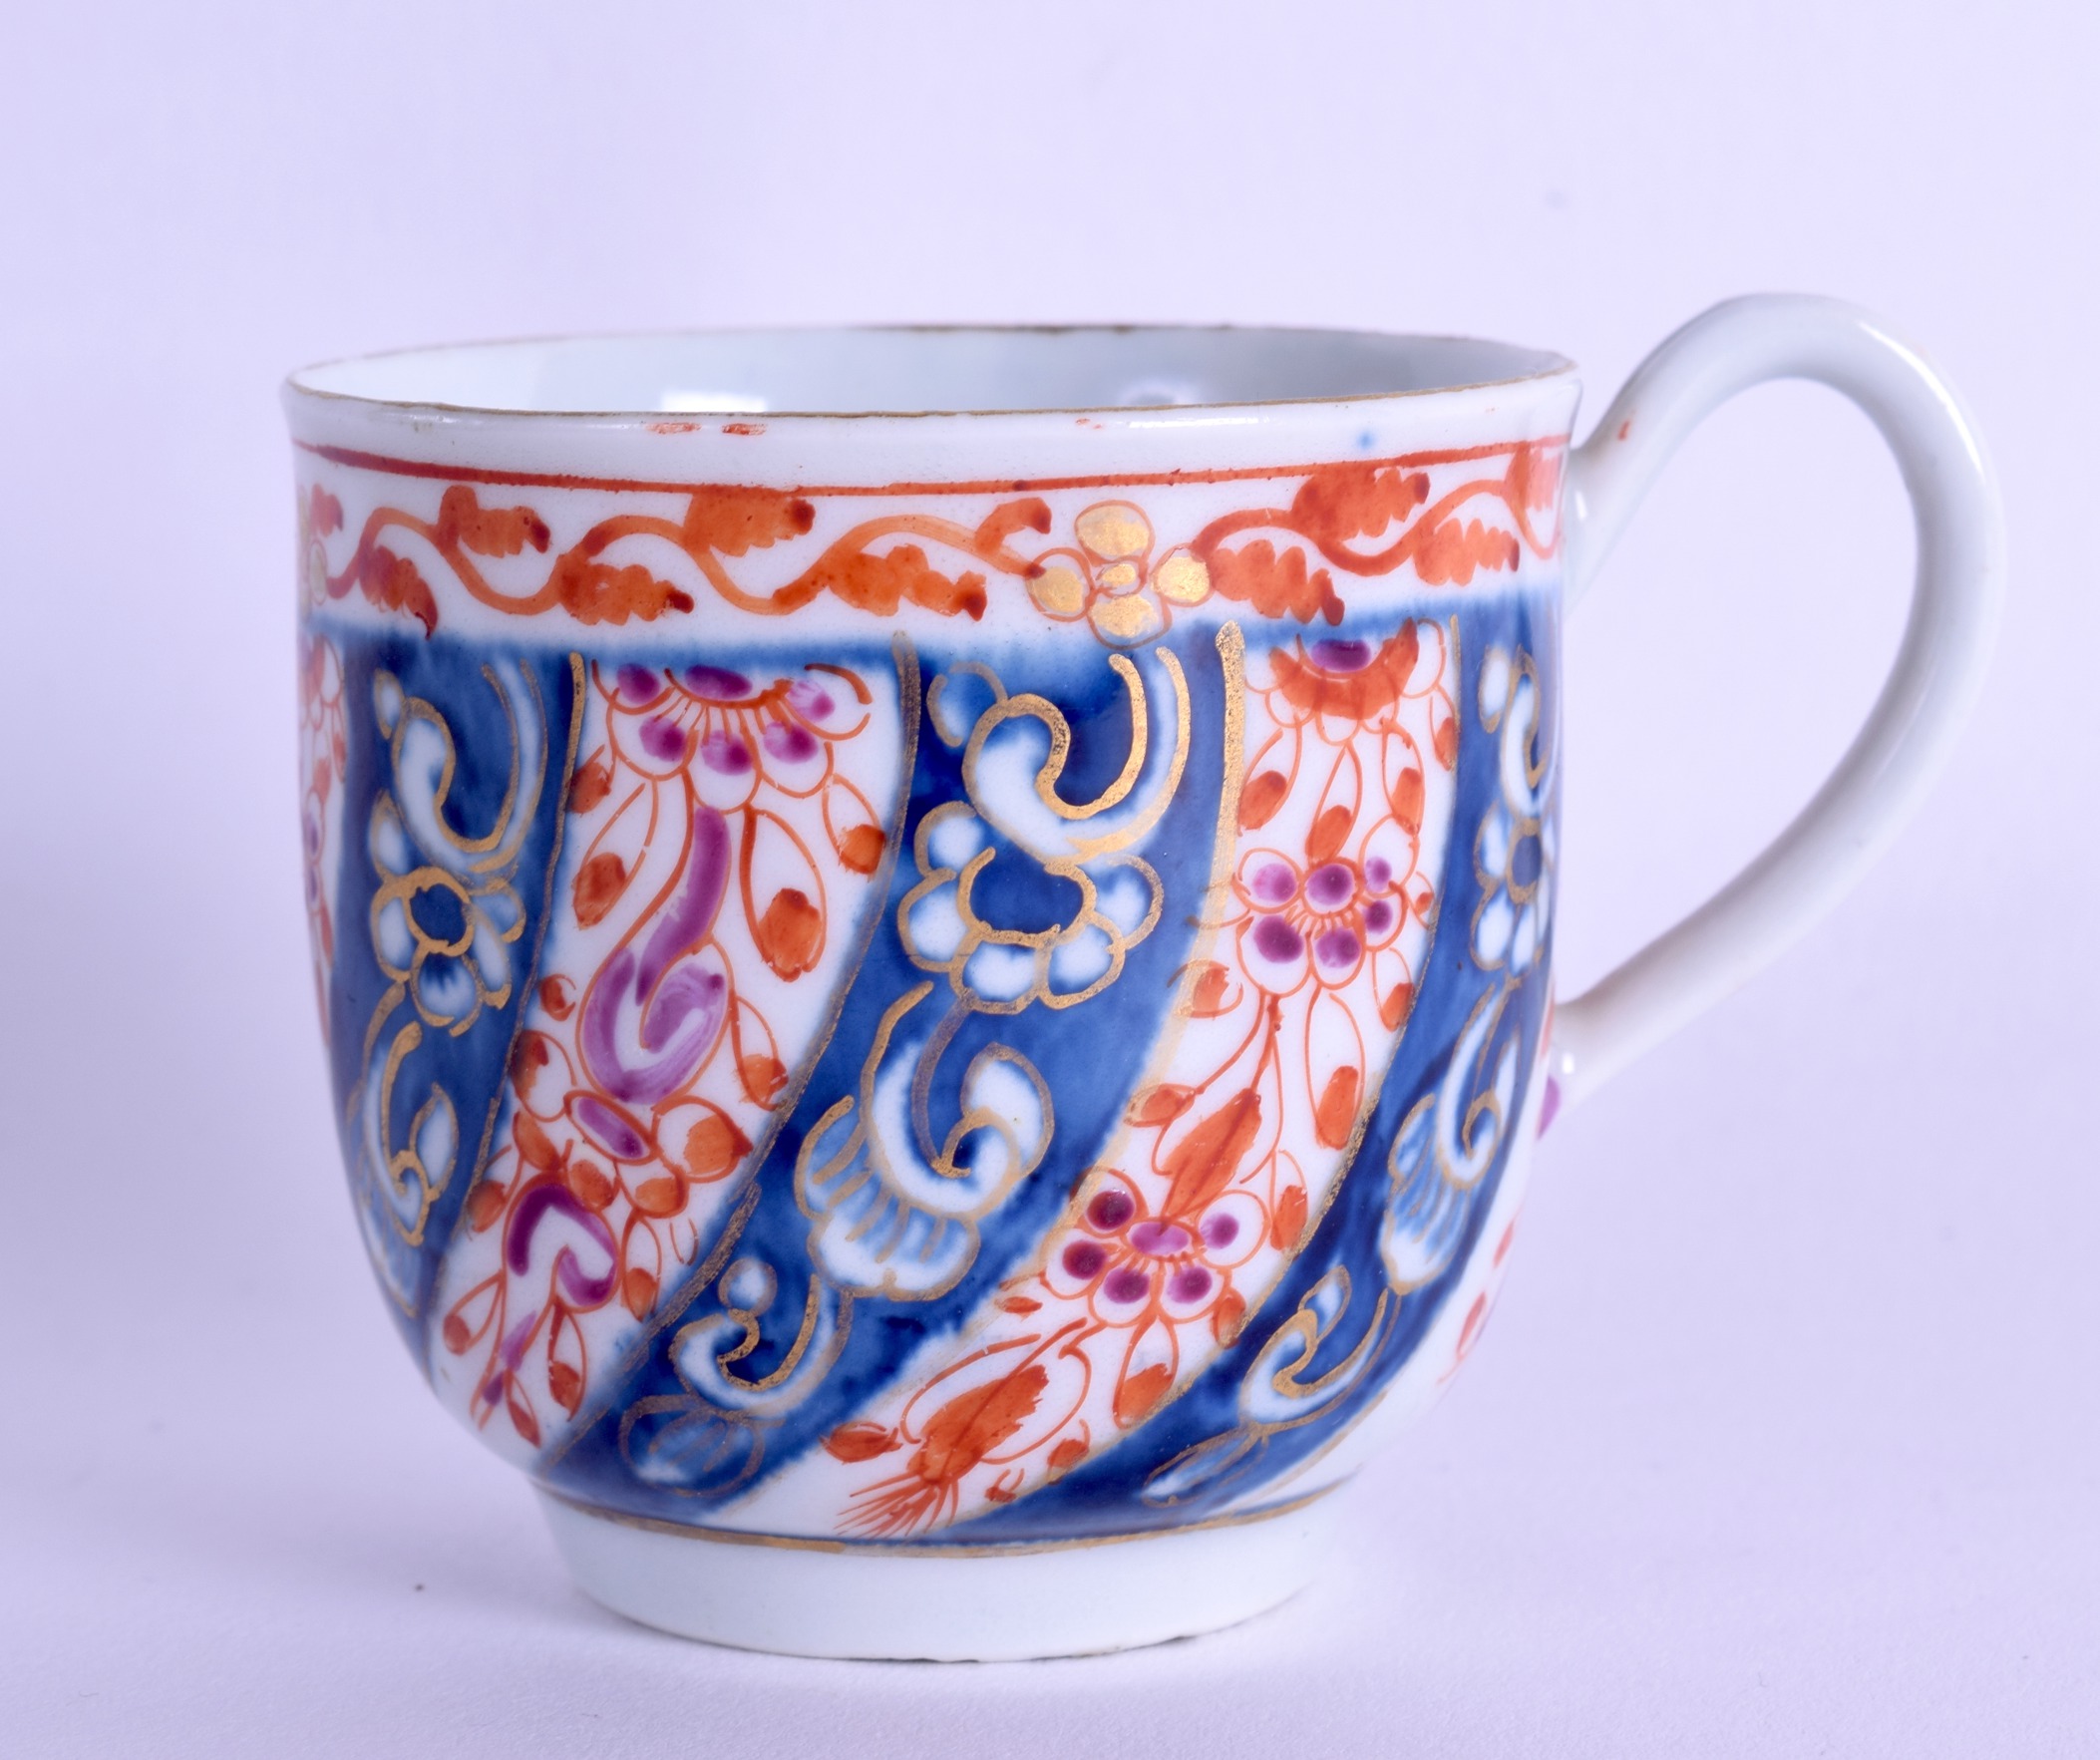 18th c. Worcester workman's mark period coffee cup painted with the Queen Charlotte pattern, this is